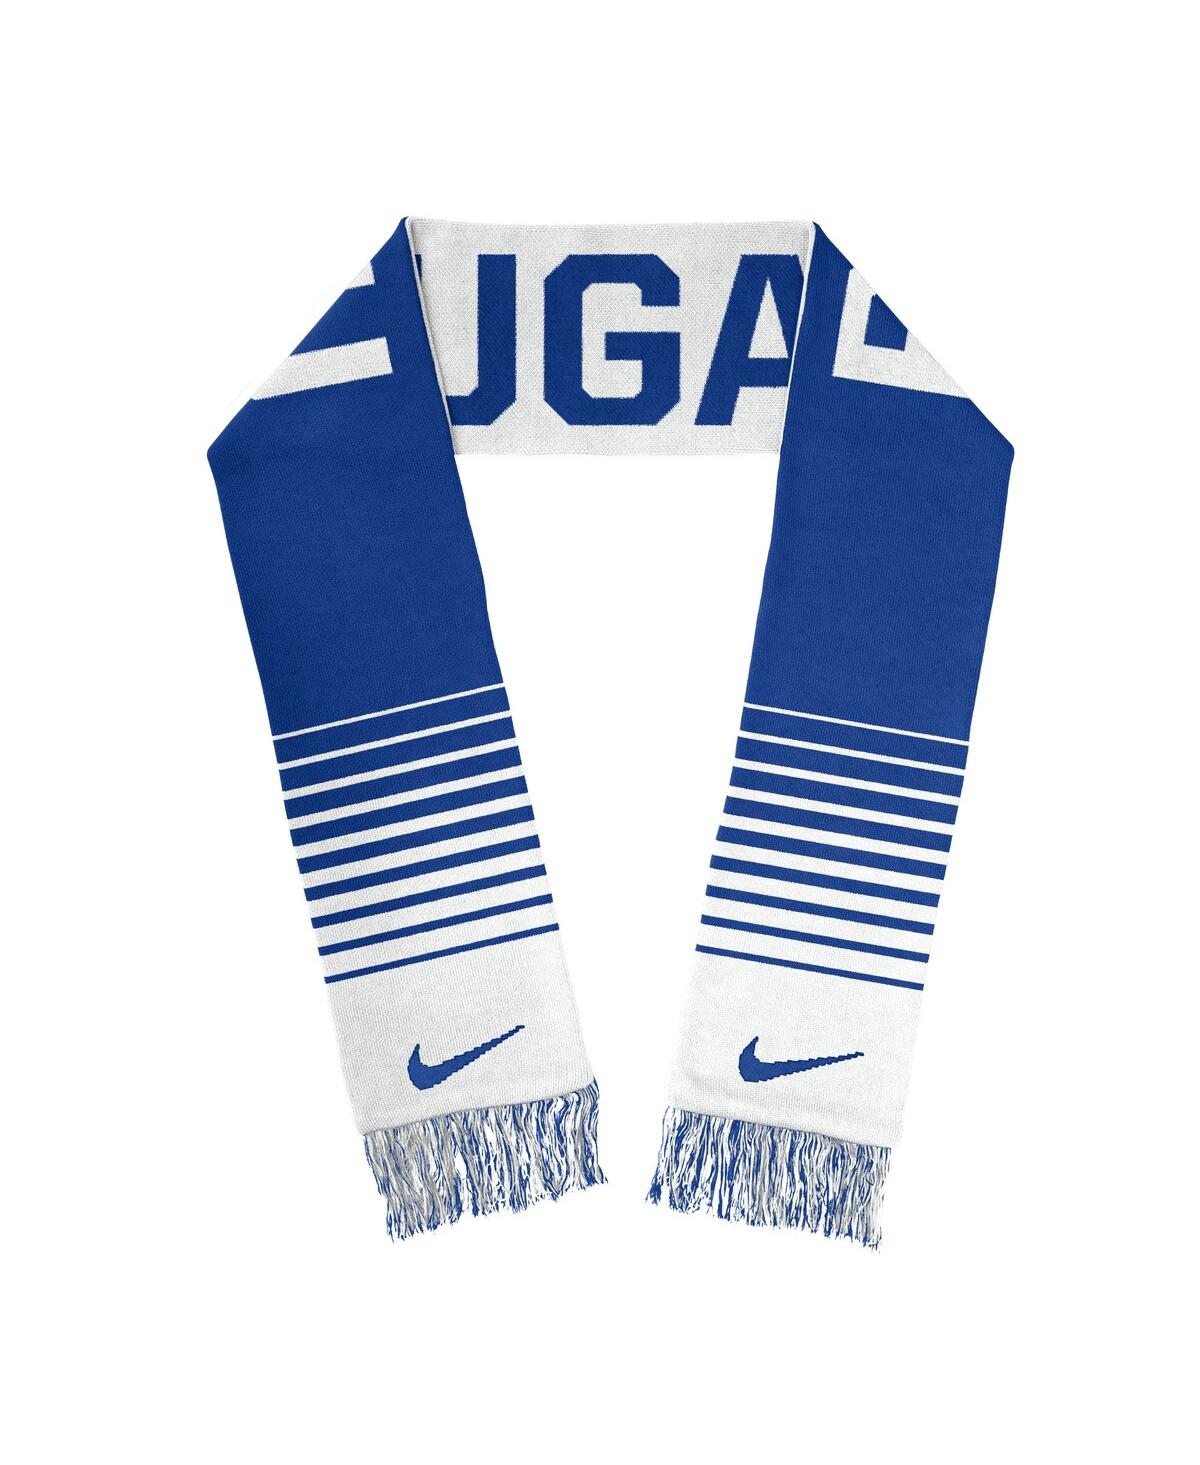 Shop Nike Men's And Women's  Byu Cougars Space Force Rivalry Scarf In Royal